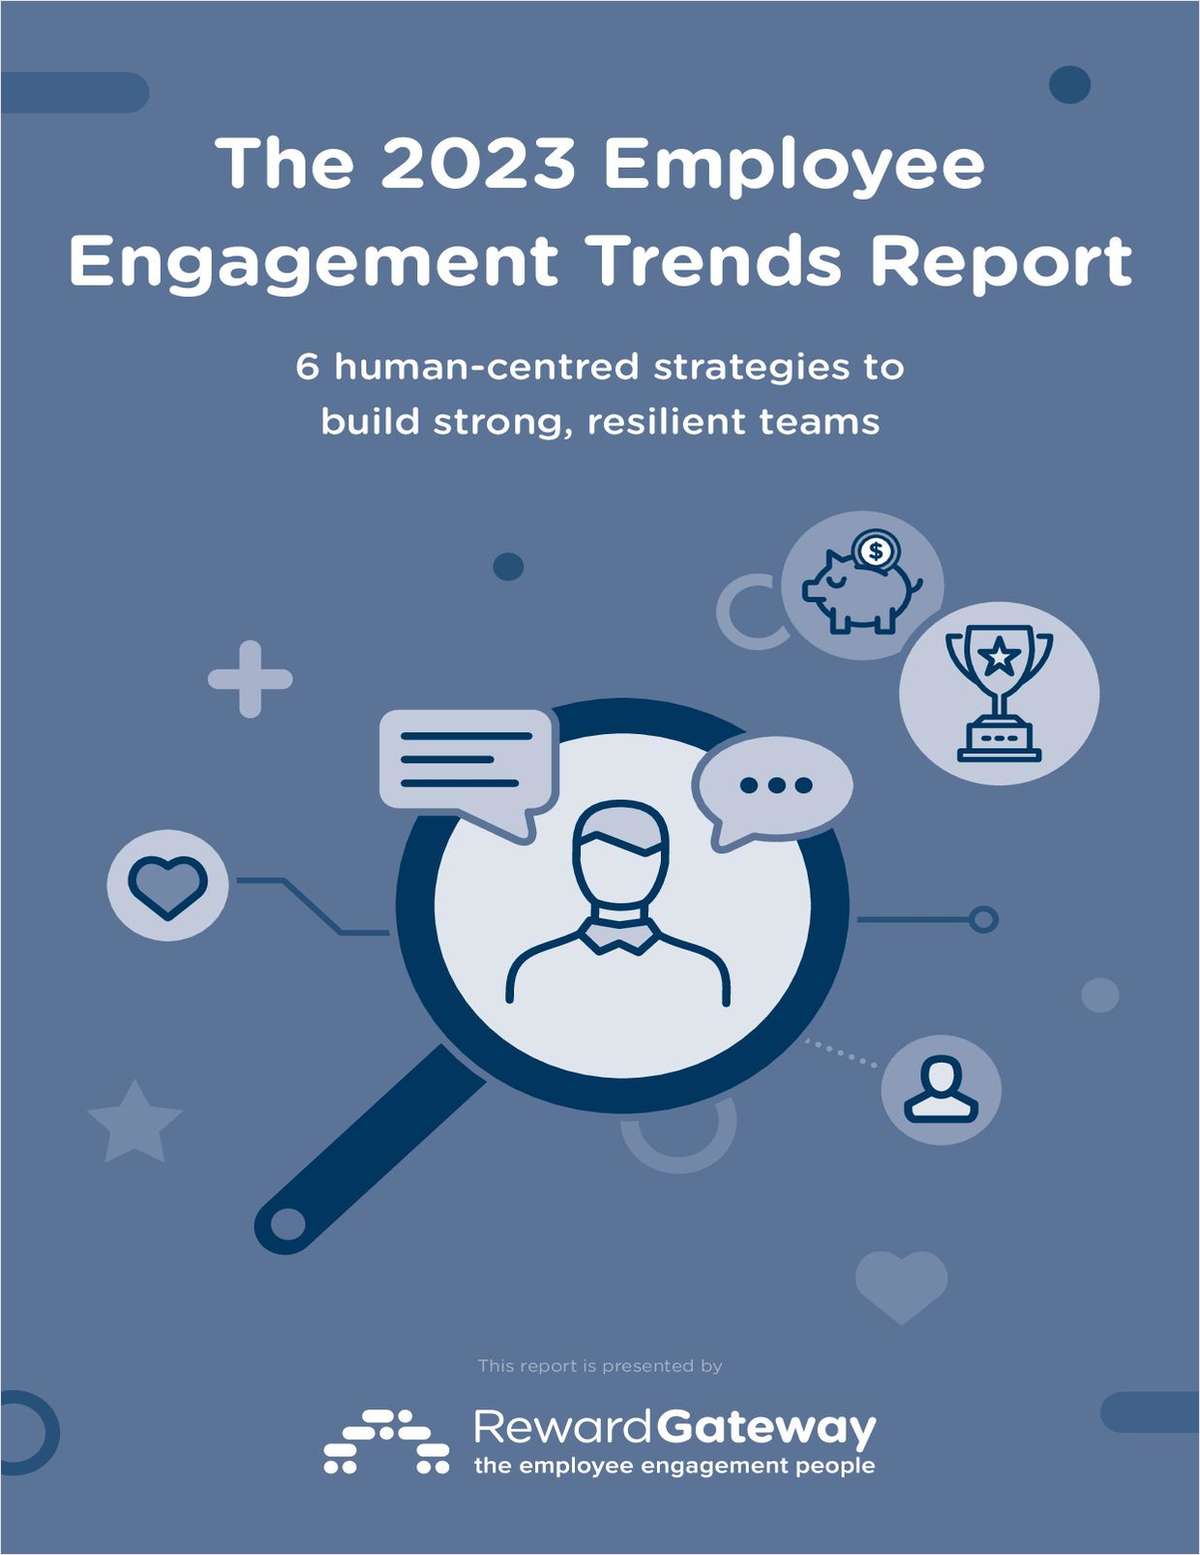 The 2023 Employee Engagement Trends Report